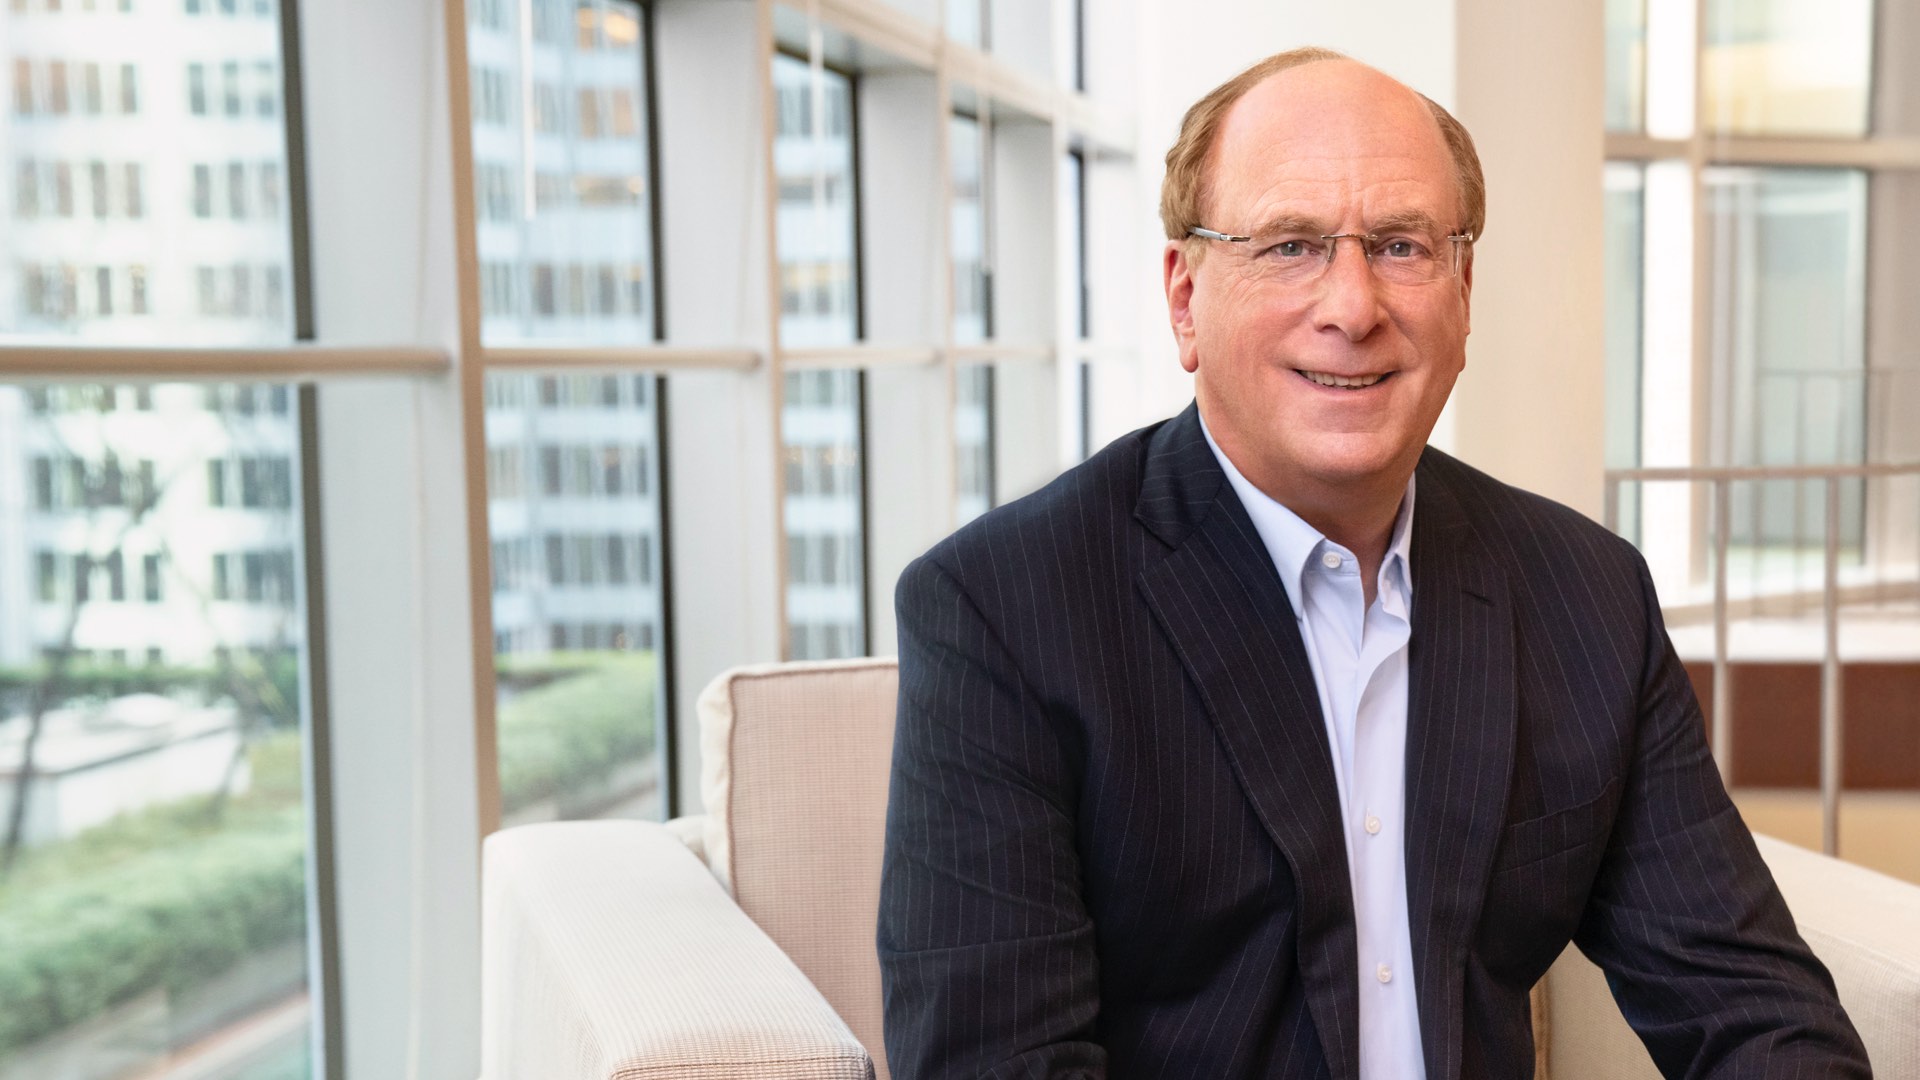 A photo of Larry Fink, BlackRock's Chairman and CEO